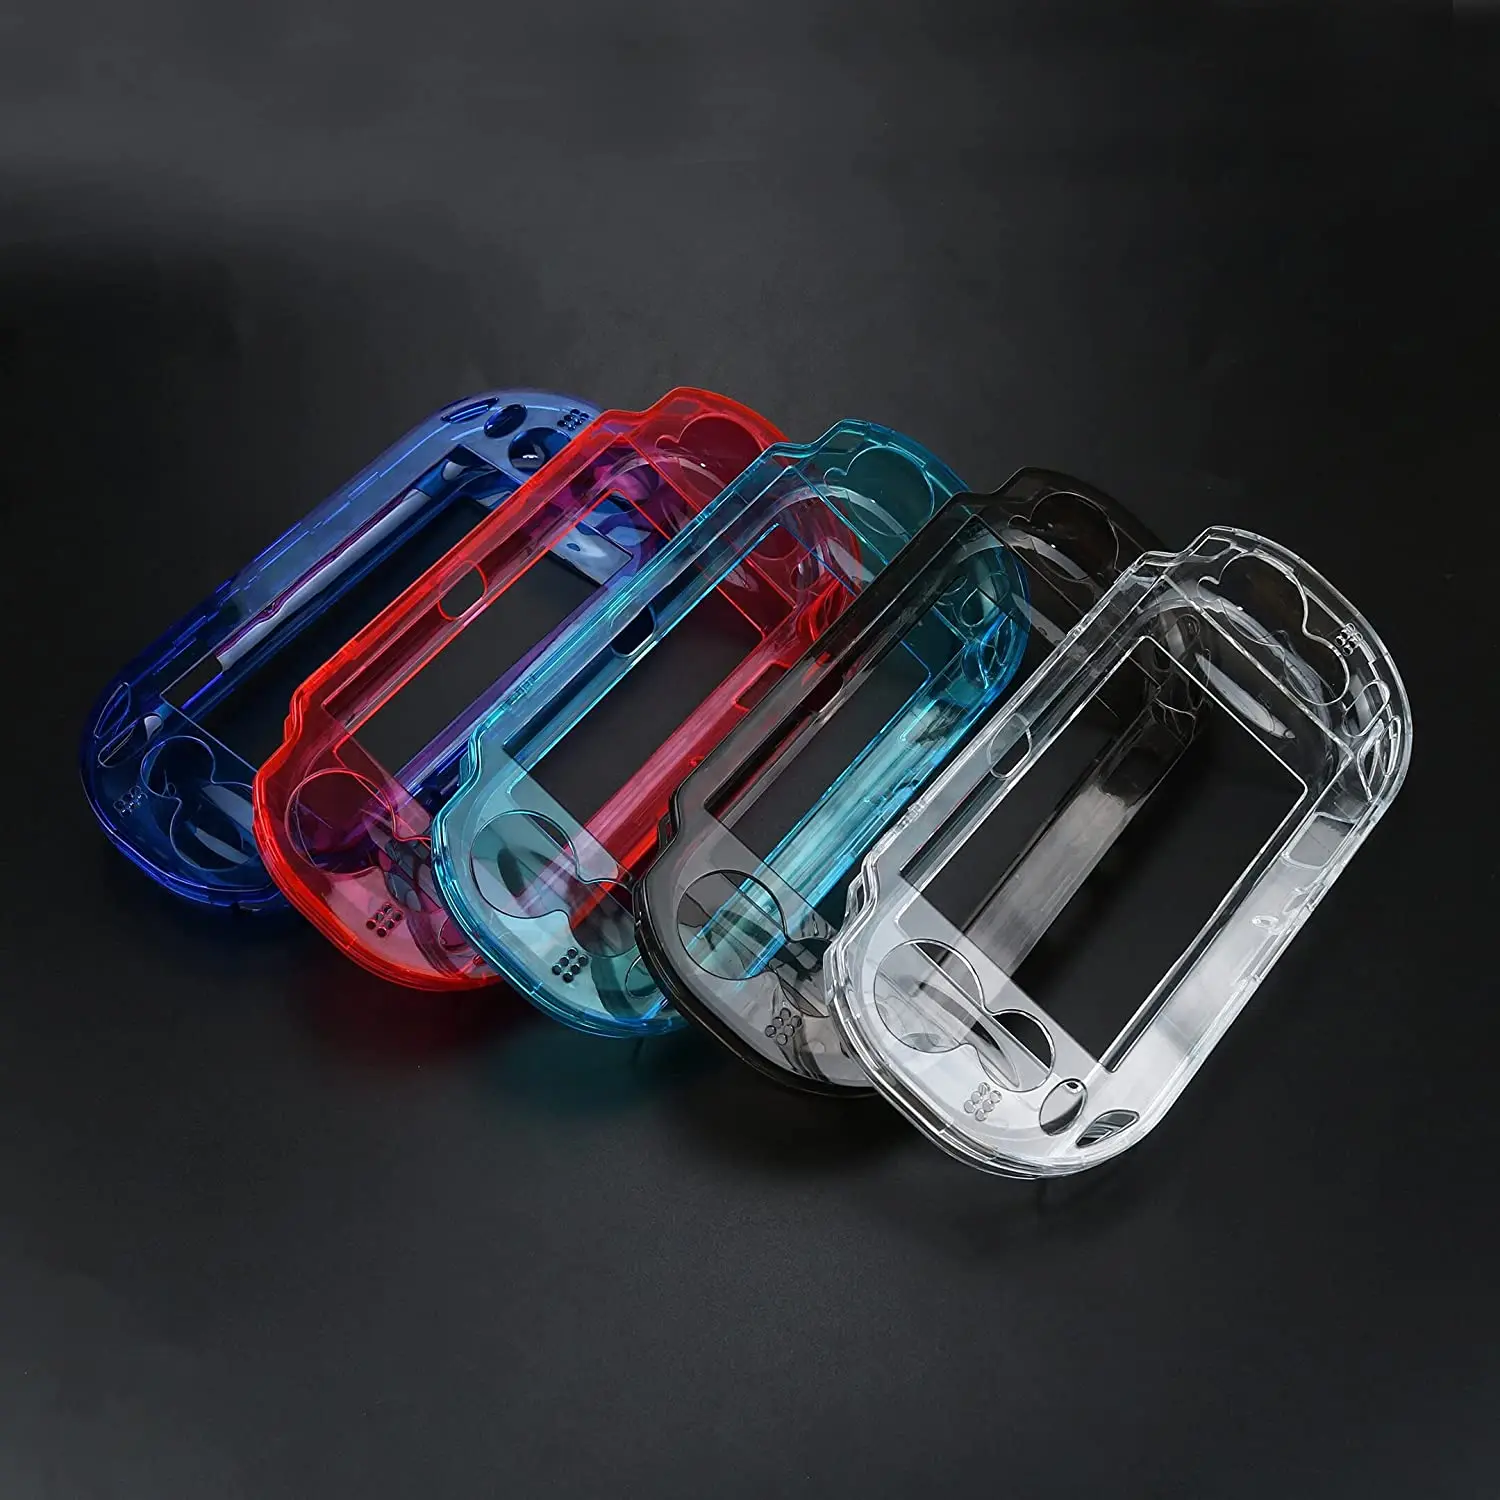 Crystal Transparent Clear Hard Case Protective Cover Skin Shell for PS Vita PSV 1000